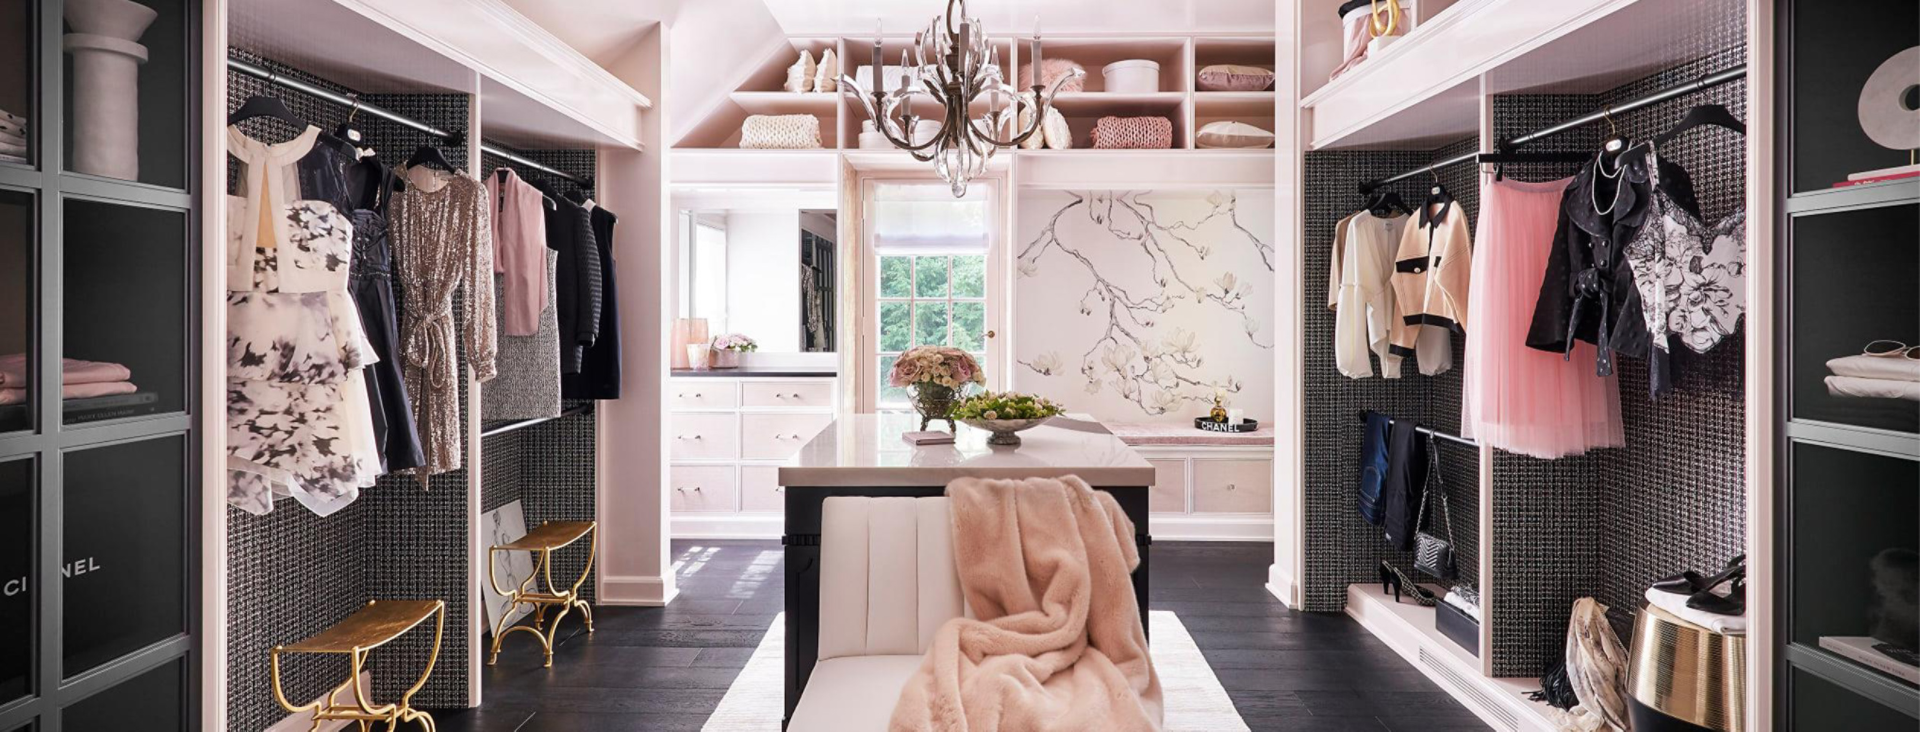 Large sunlit walk-in closet with pastel pink walls, clothing racks, elegant chandelier, and mural of a branch on one wall.